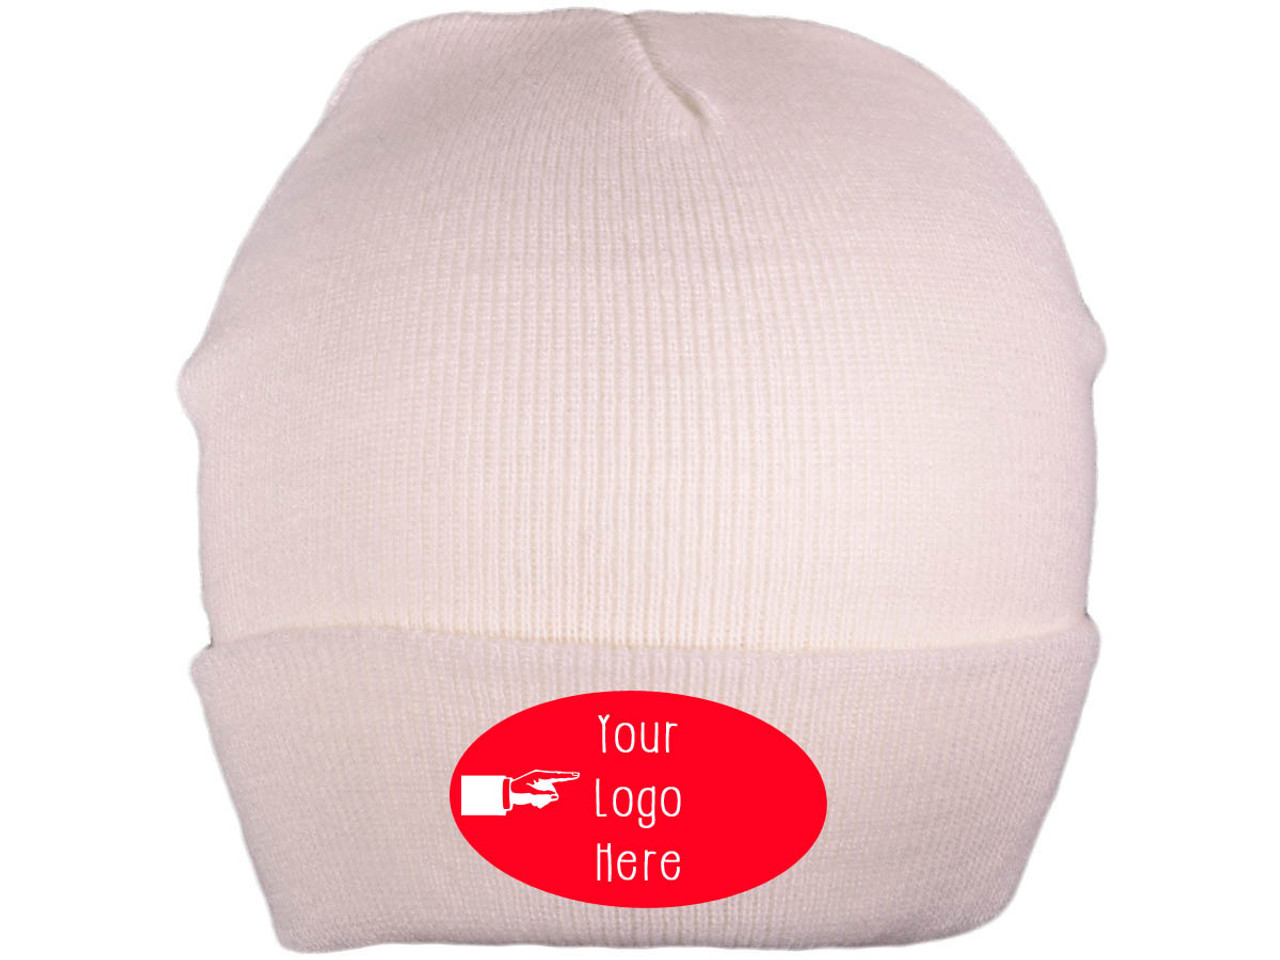 Wholesale 576 pcs Custom or Personalized Hats Overseas Embroidered Beanies  BK Caps